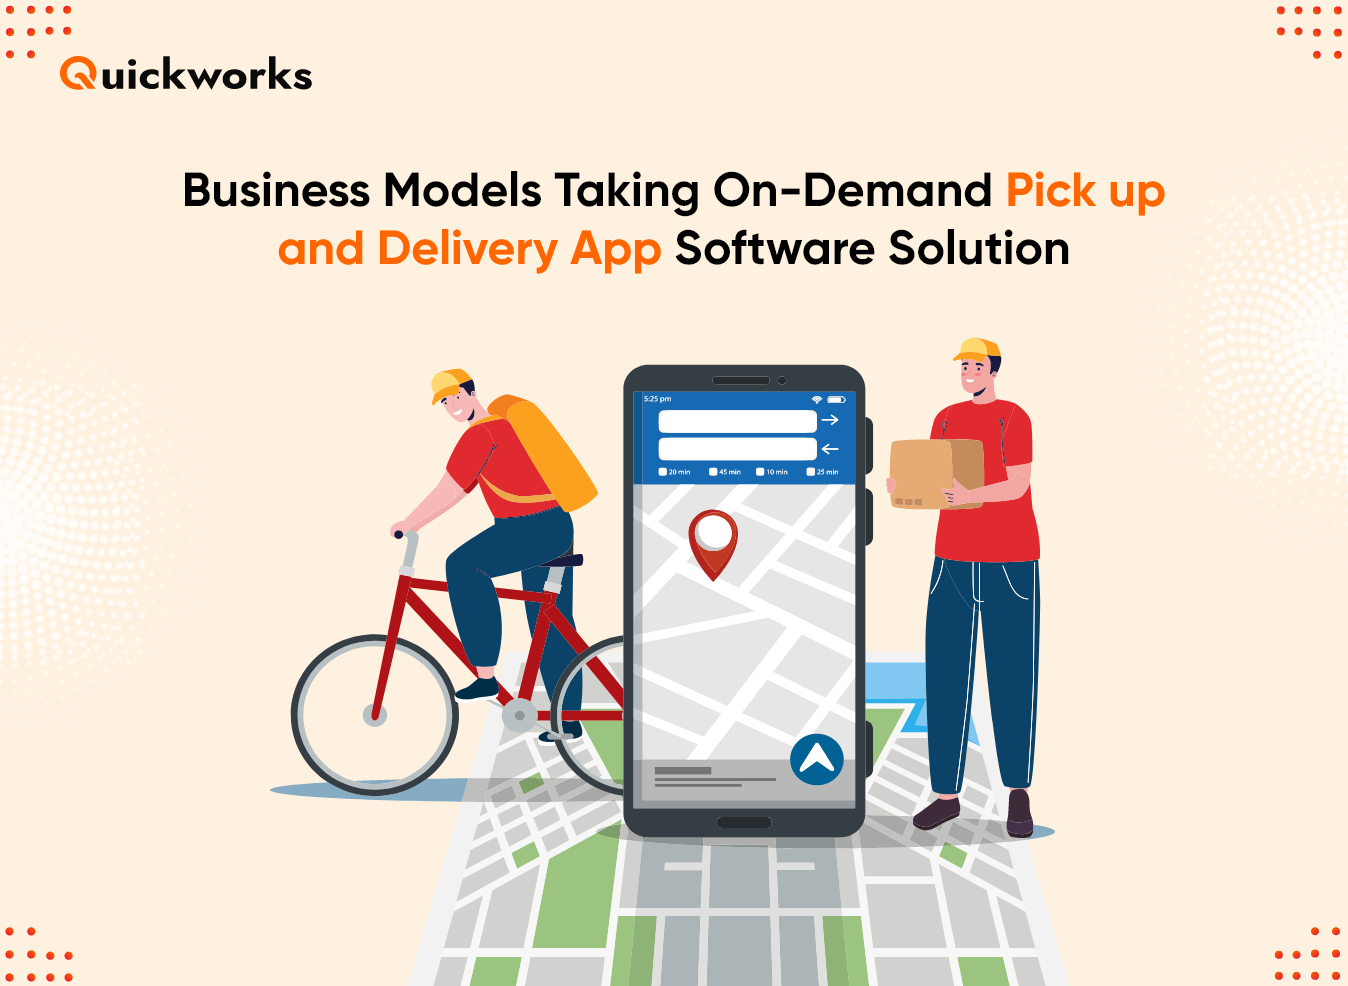 On-Demand Pickup and Delivery App Software Solution